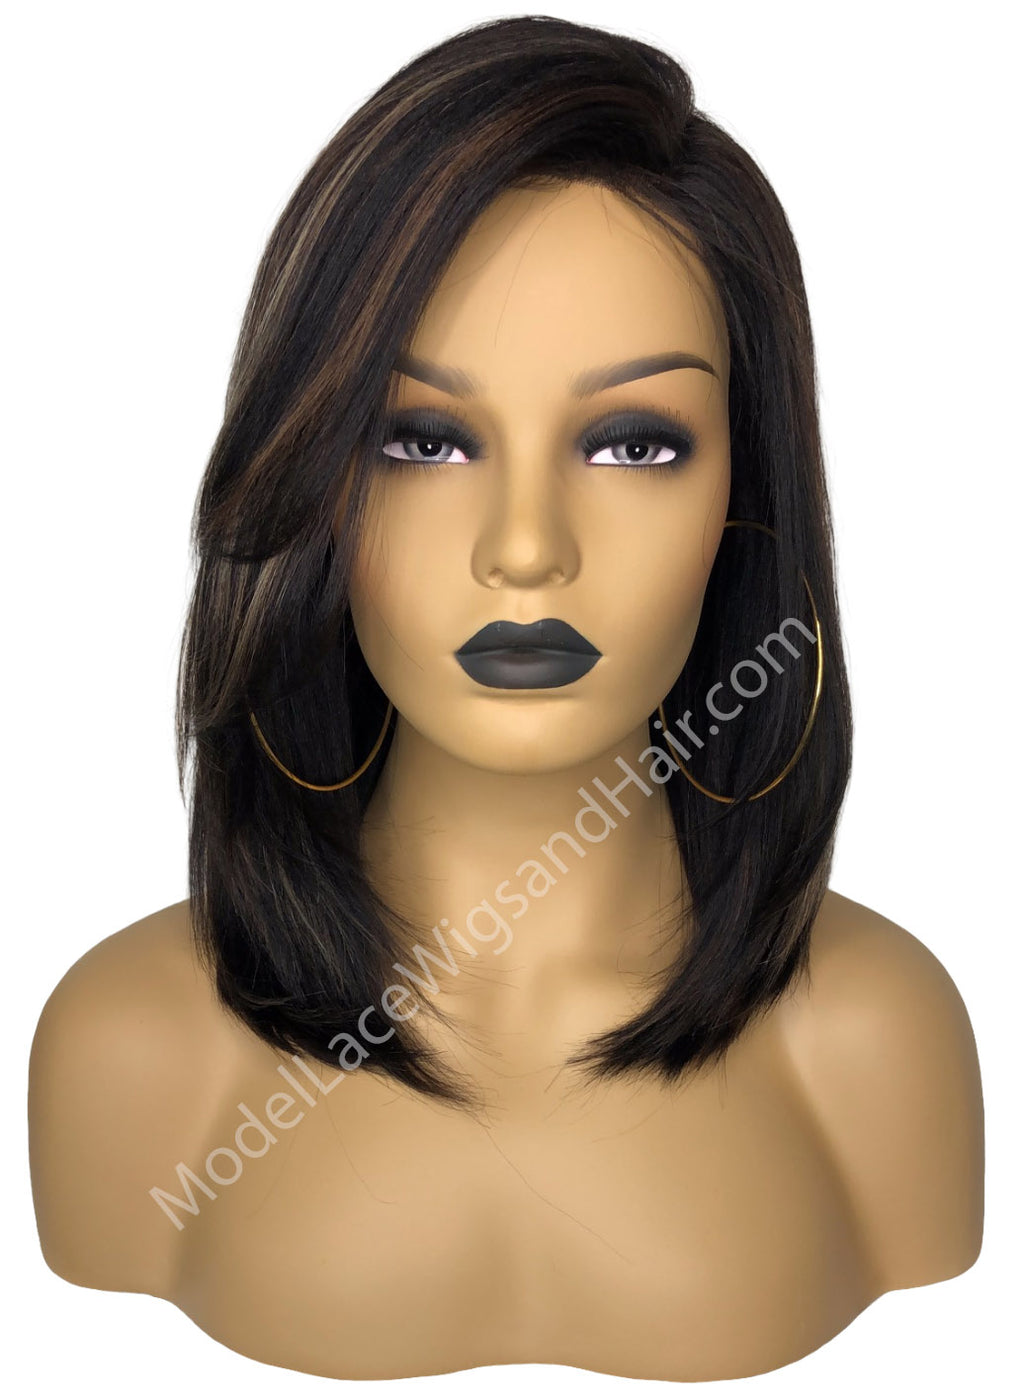 Clearance Lace Front Wig (Michelle) Item #: LF564 | Ships Within 24 Hours